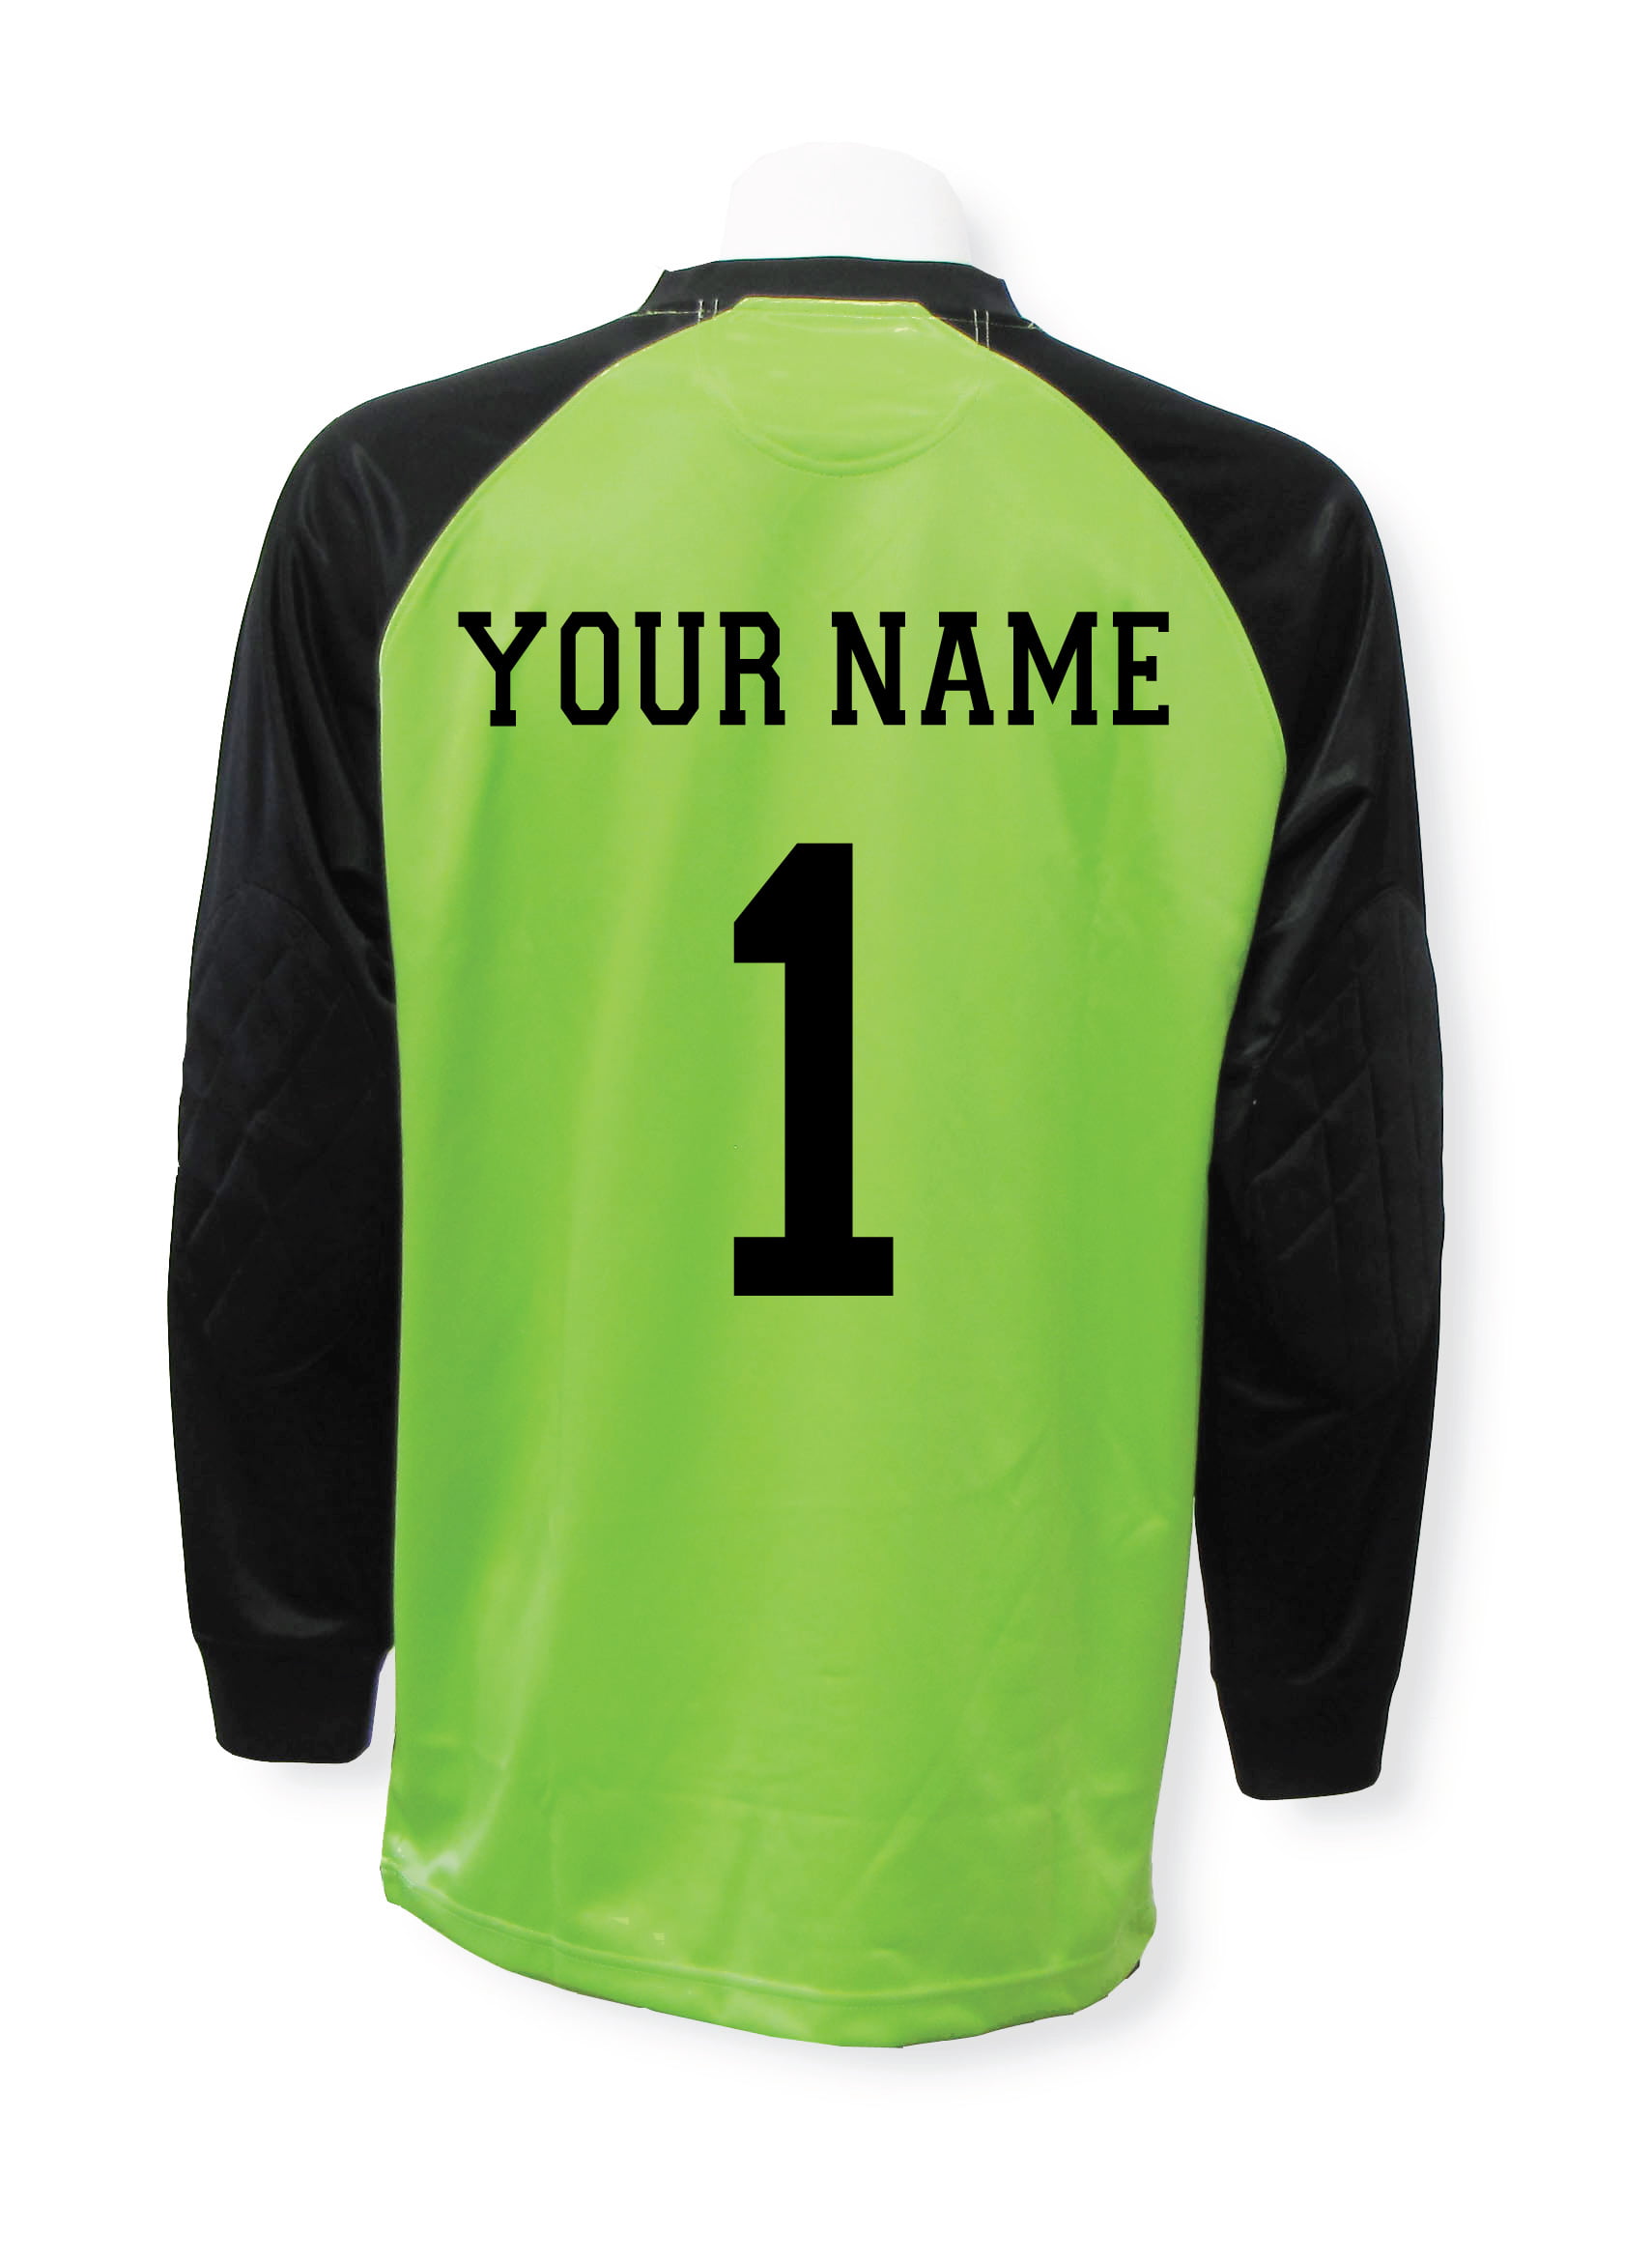 name on back of jersey